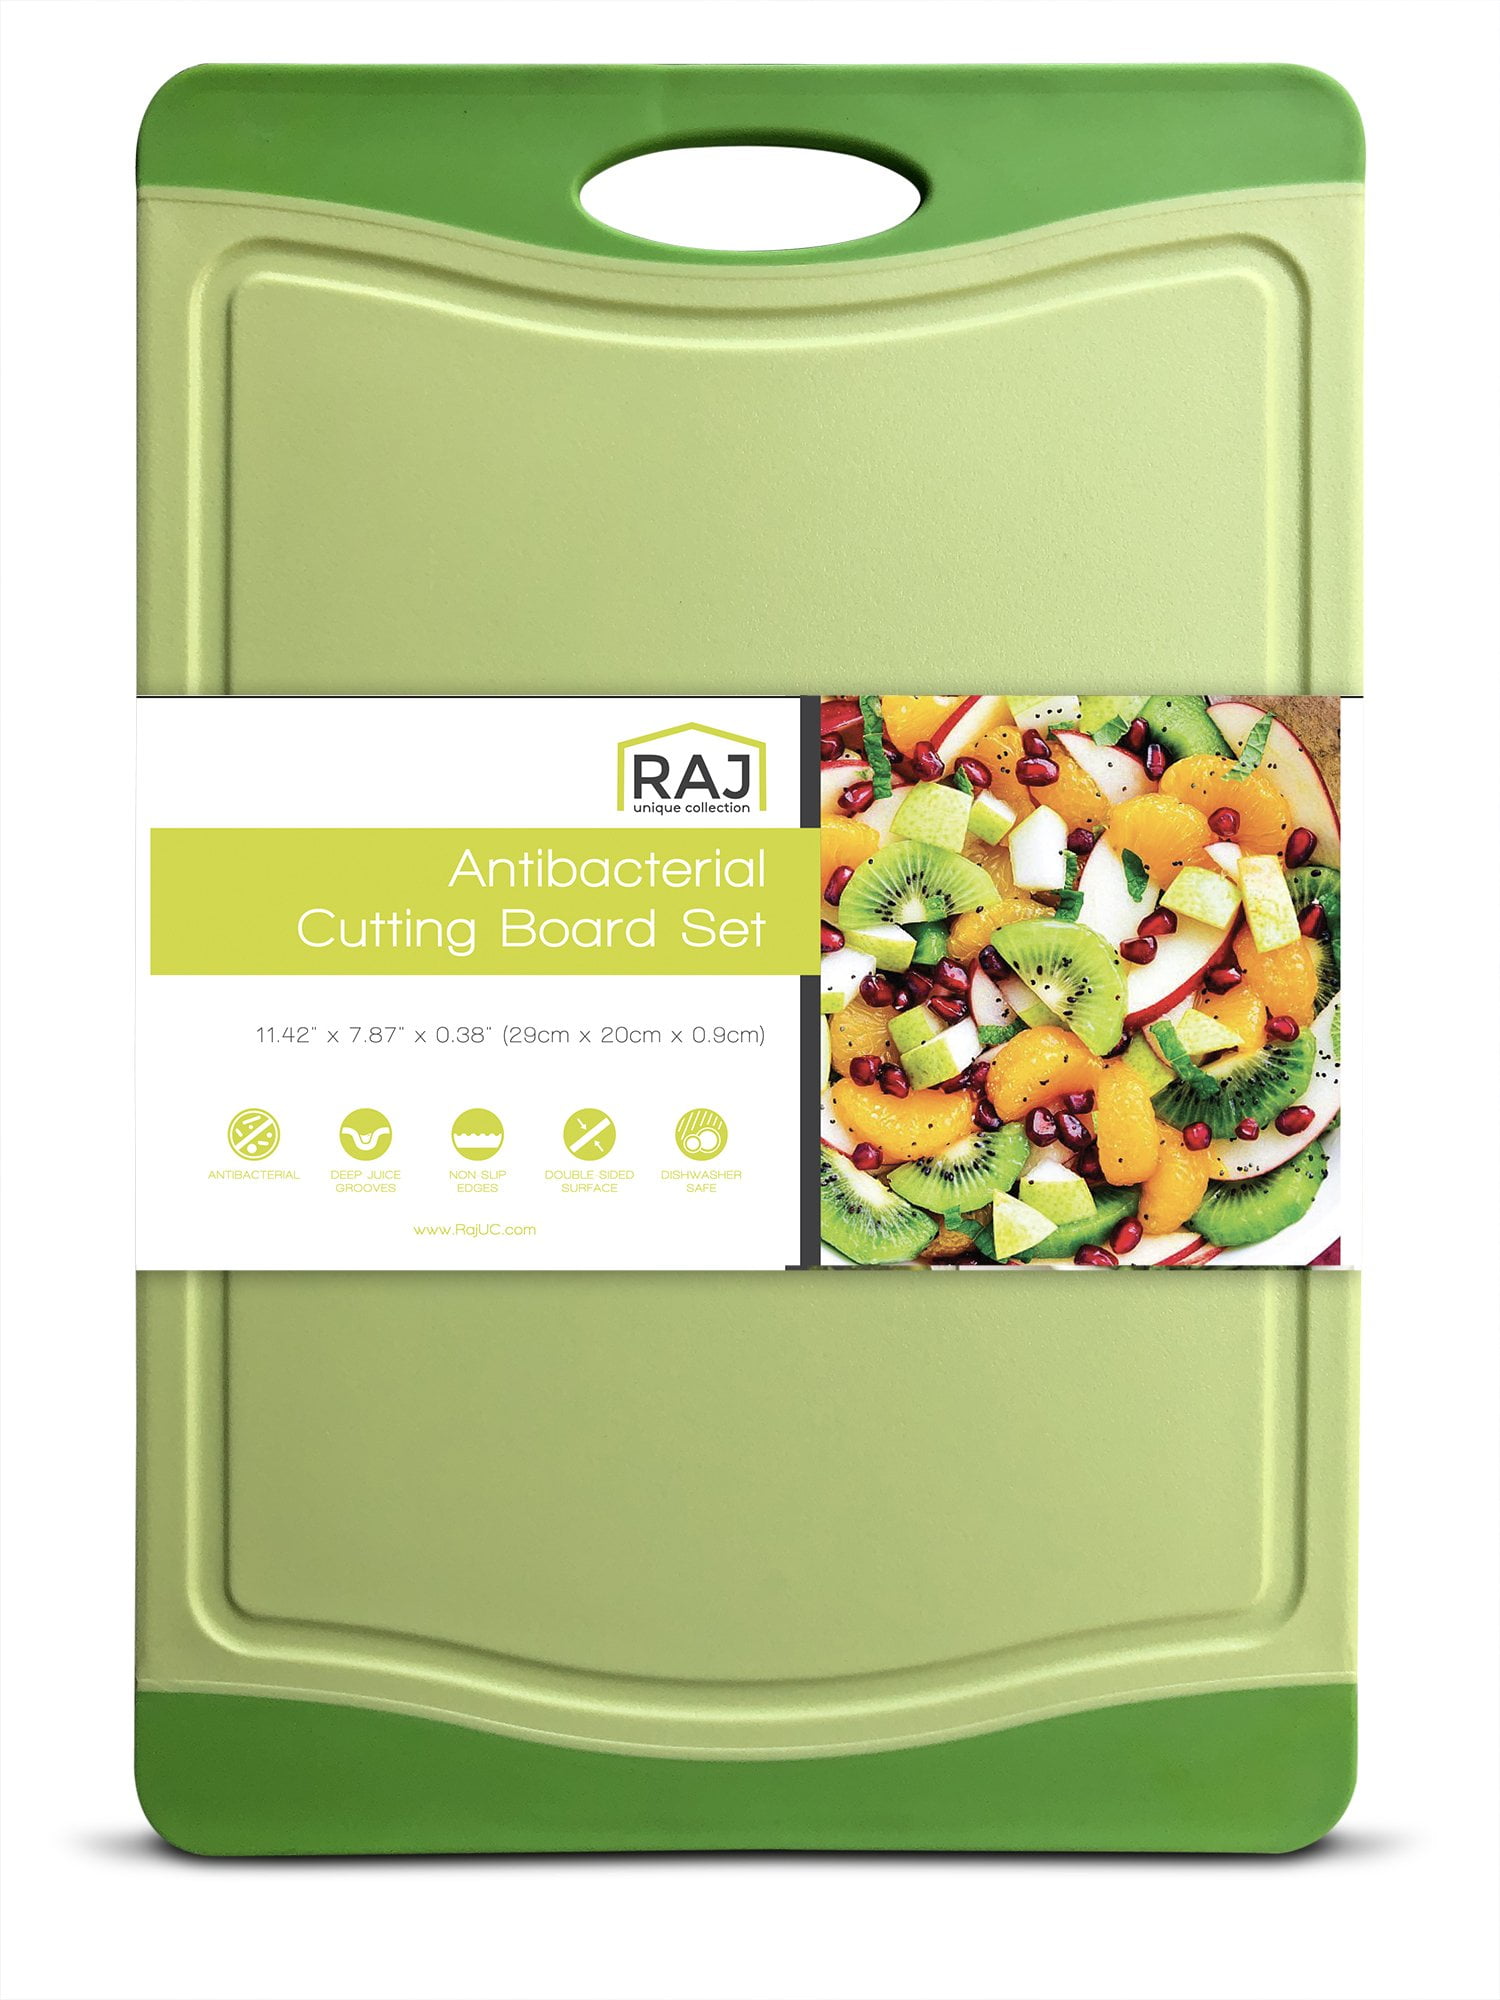 Raj Plastic Cutting Board Reversible Cutting board, Dishwasher Safe, Chopping  Boards, Juice Groove, Large Handle, Non-Slip, BPA Free (Small (11.42 x  7.87), Lime Green) 